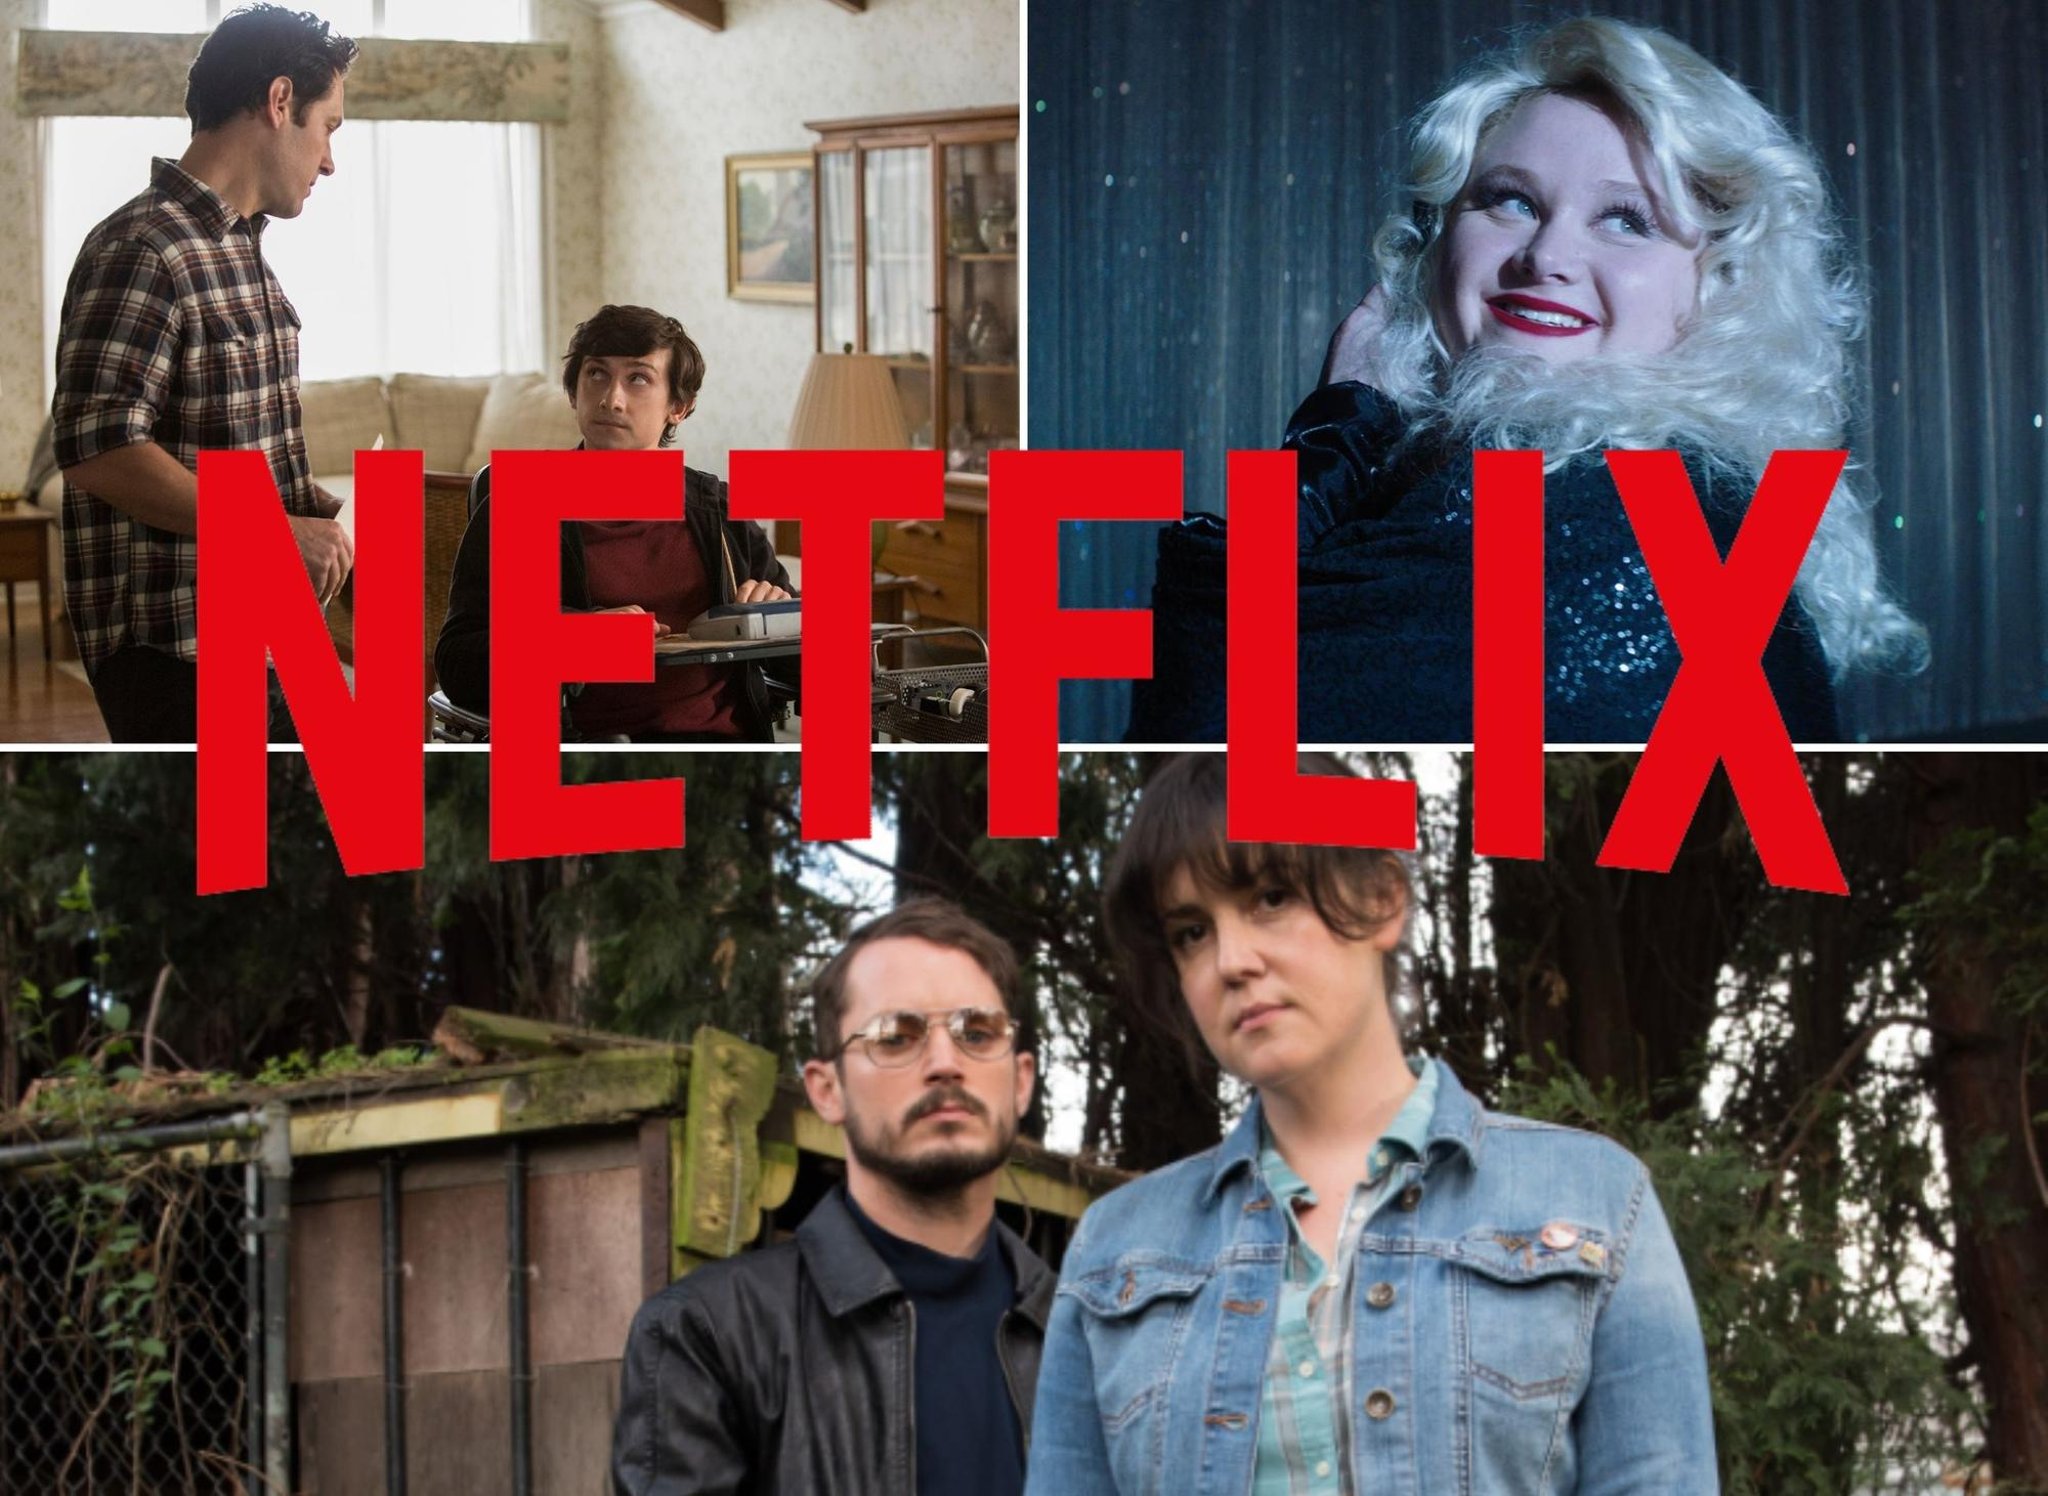 Best comedy on Netflix 2022: 10 of the funniest films produced by Netflix, as per Rotten Tomatoes